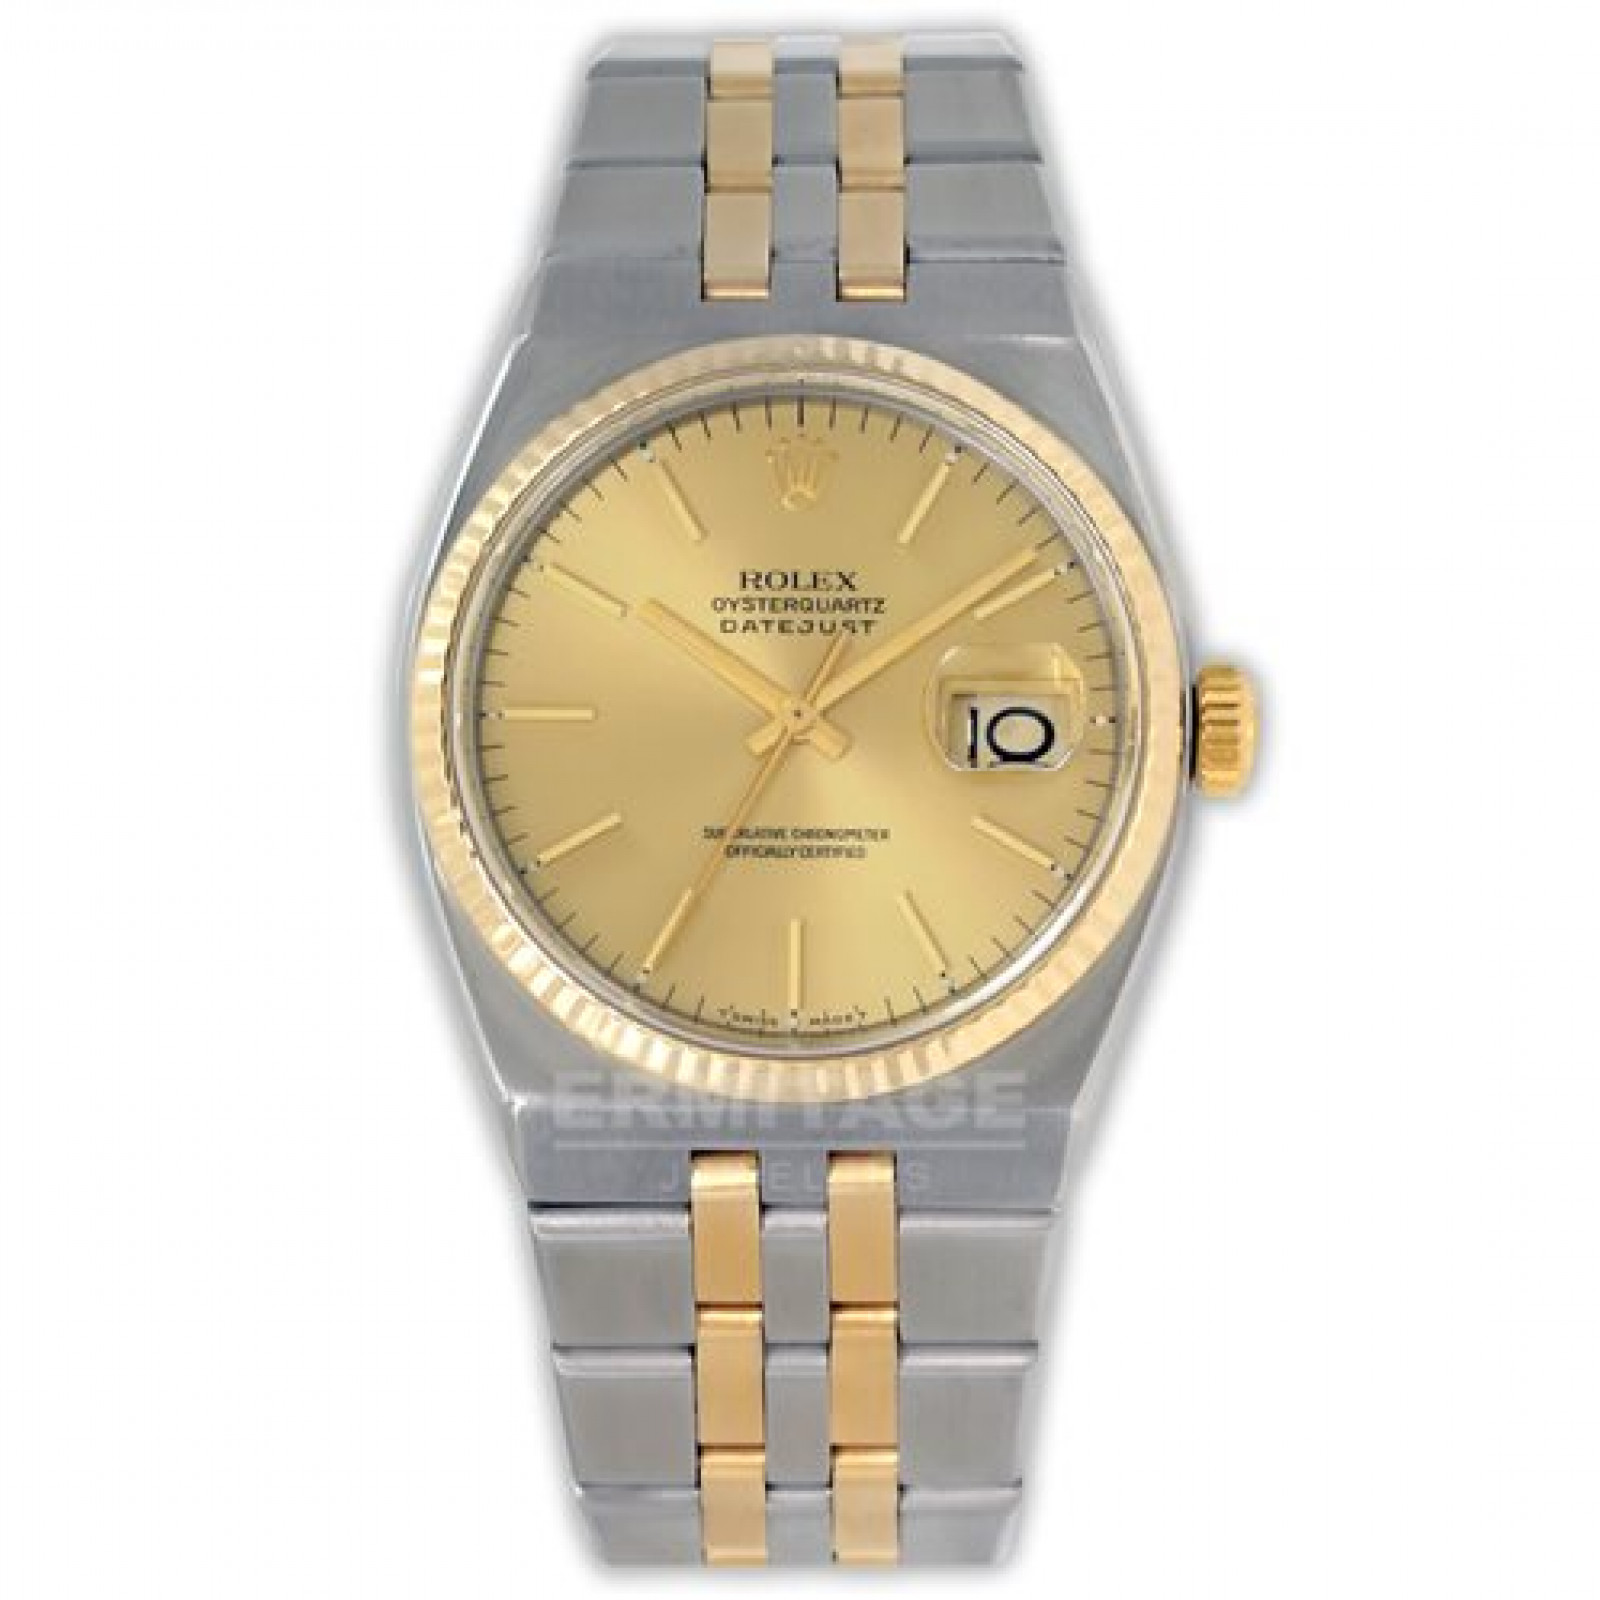 Pre-Owned Rolex Datejust Oysterquartz 17013 Gold & Steel Year 1981